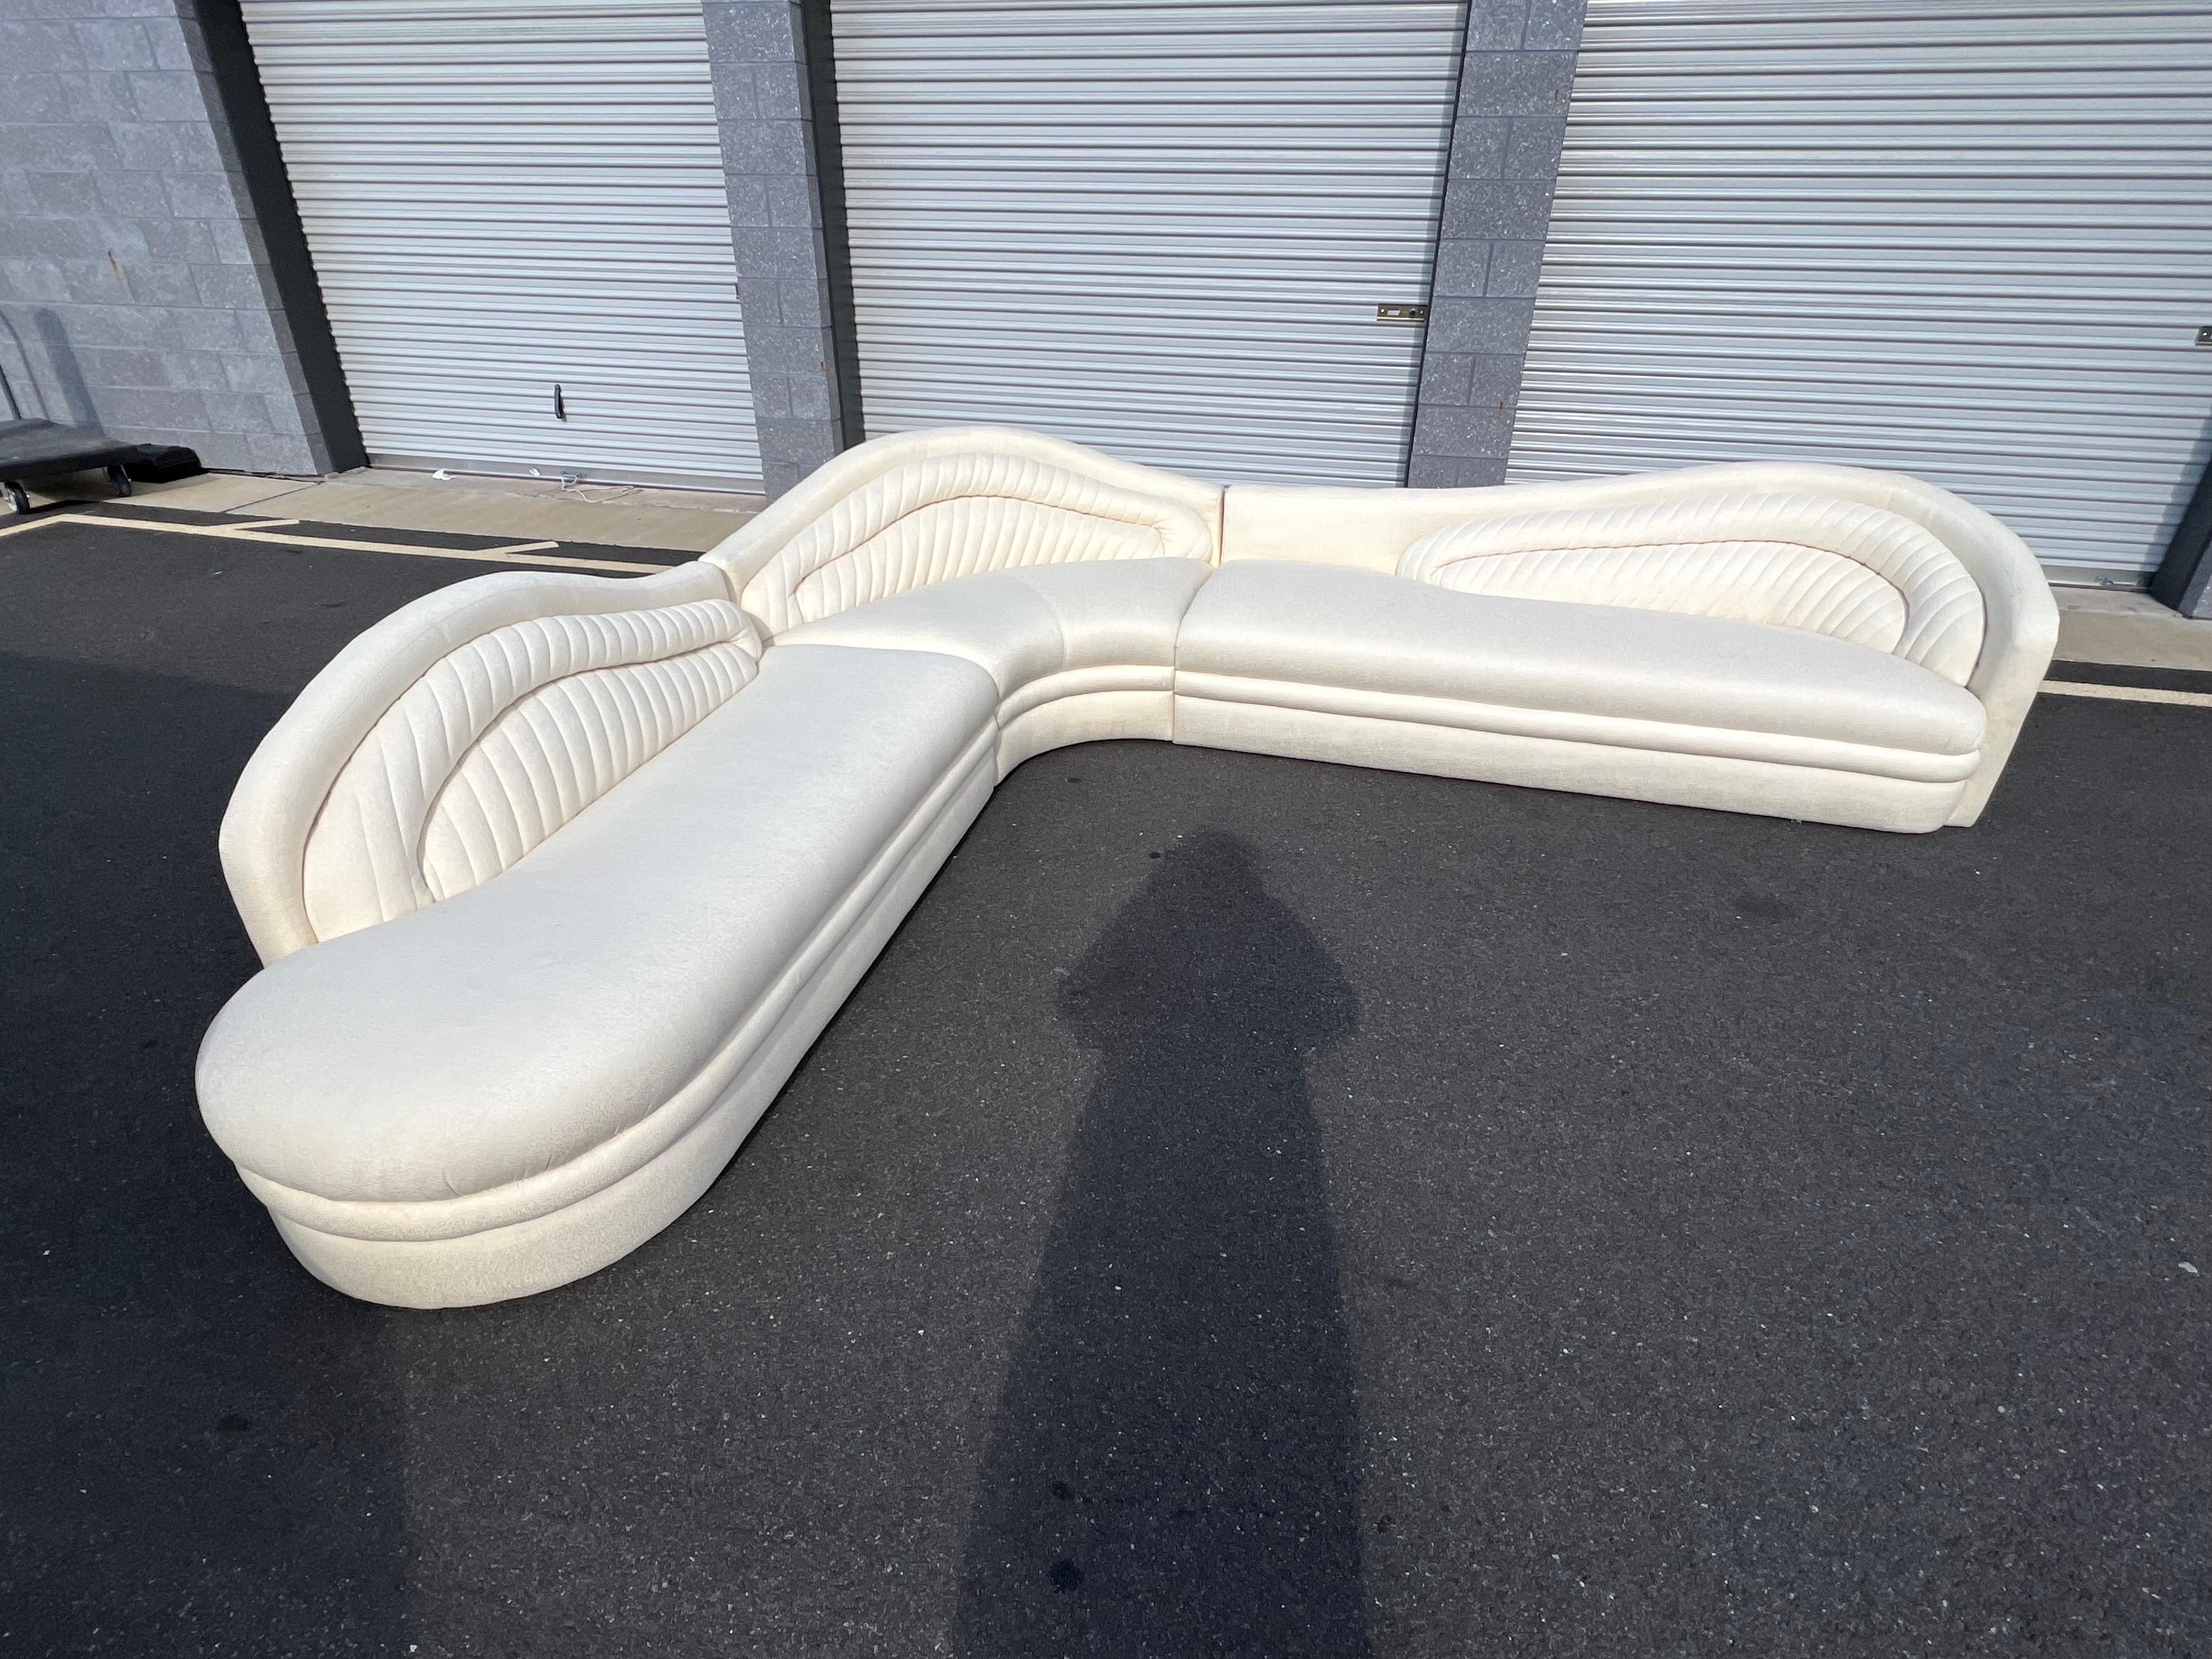 This sectional is custom made by Weiman (See the label in the last photo) in the style of Vladimir Kagan

The sectional has 3 pieces. One of the most unique features of this sectional is the details of the cloud shaped like seat. The wavy curvy